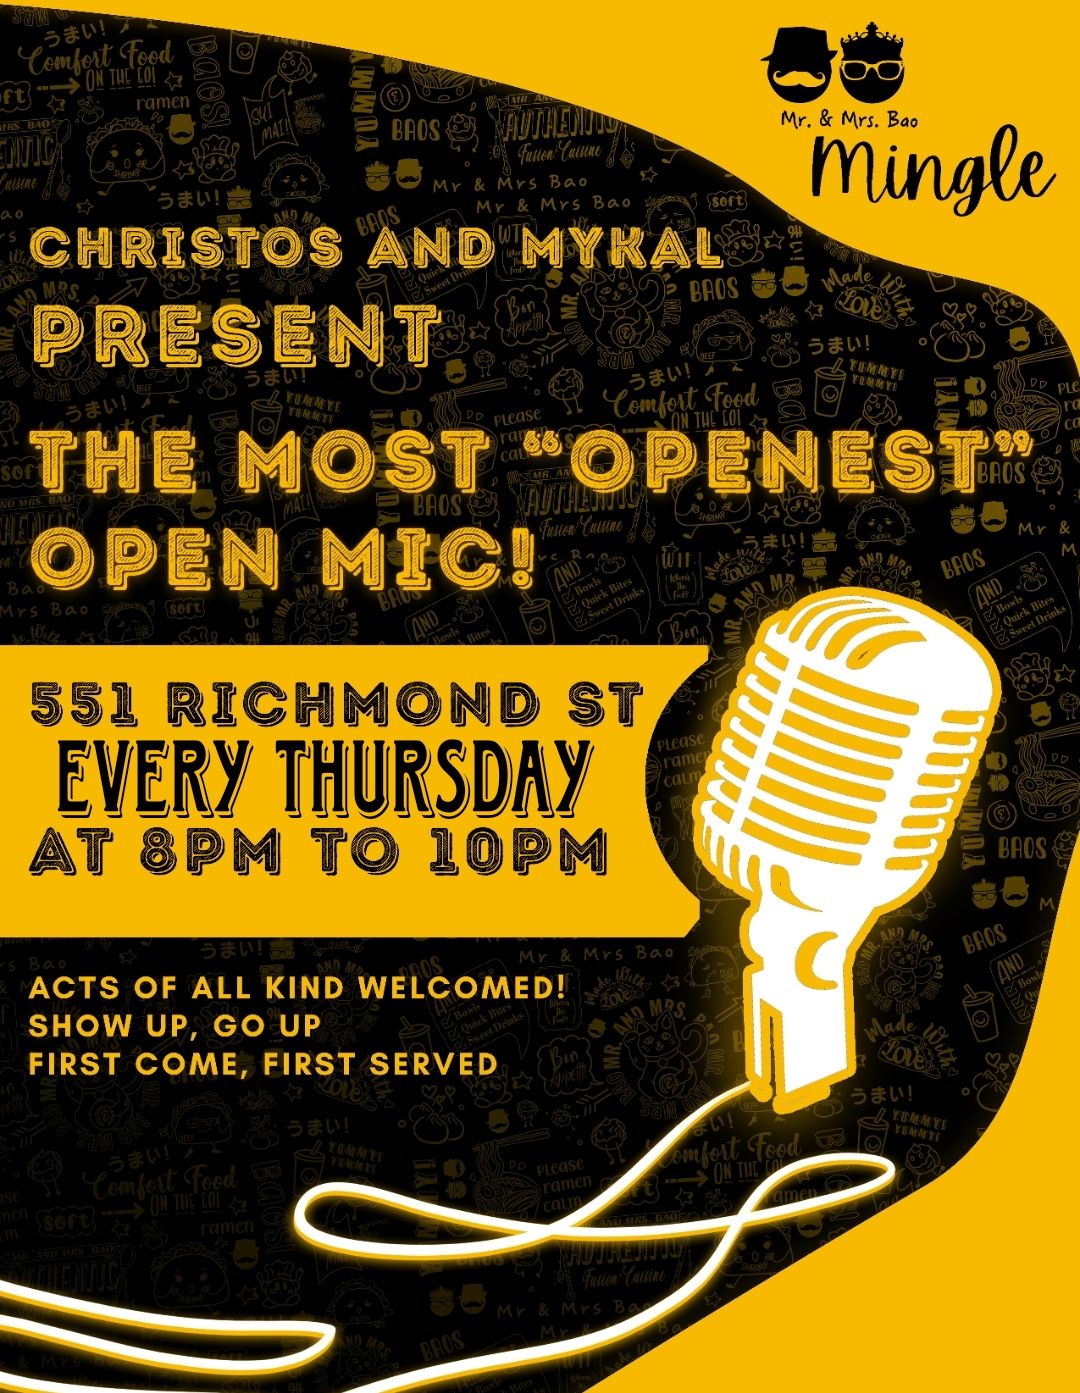 Christos And Mykal Present: The Openest Open Mic !